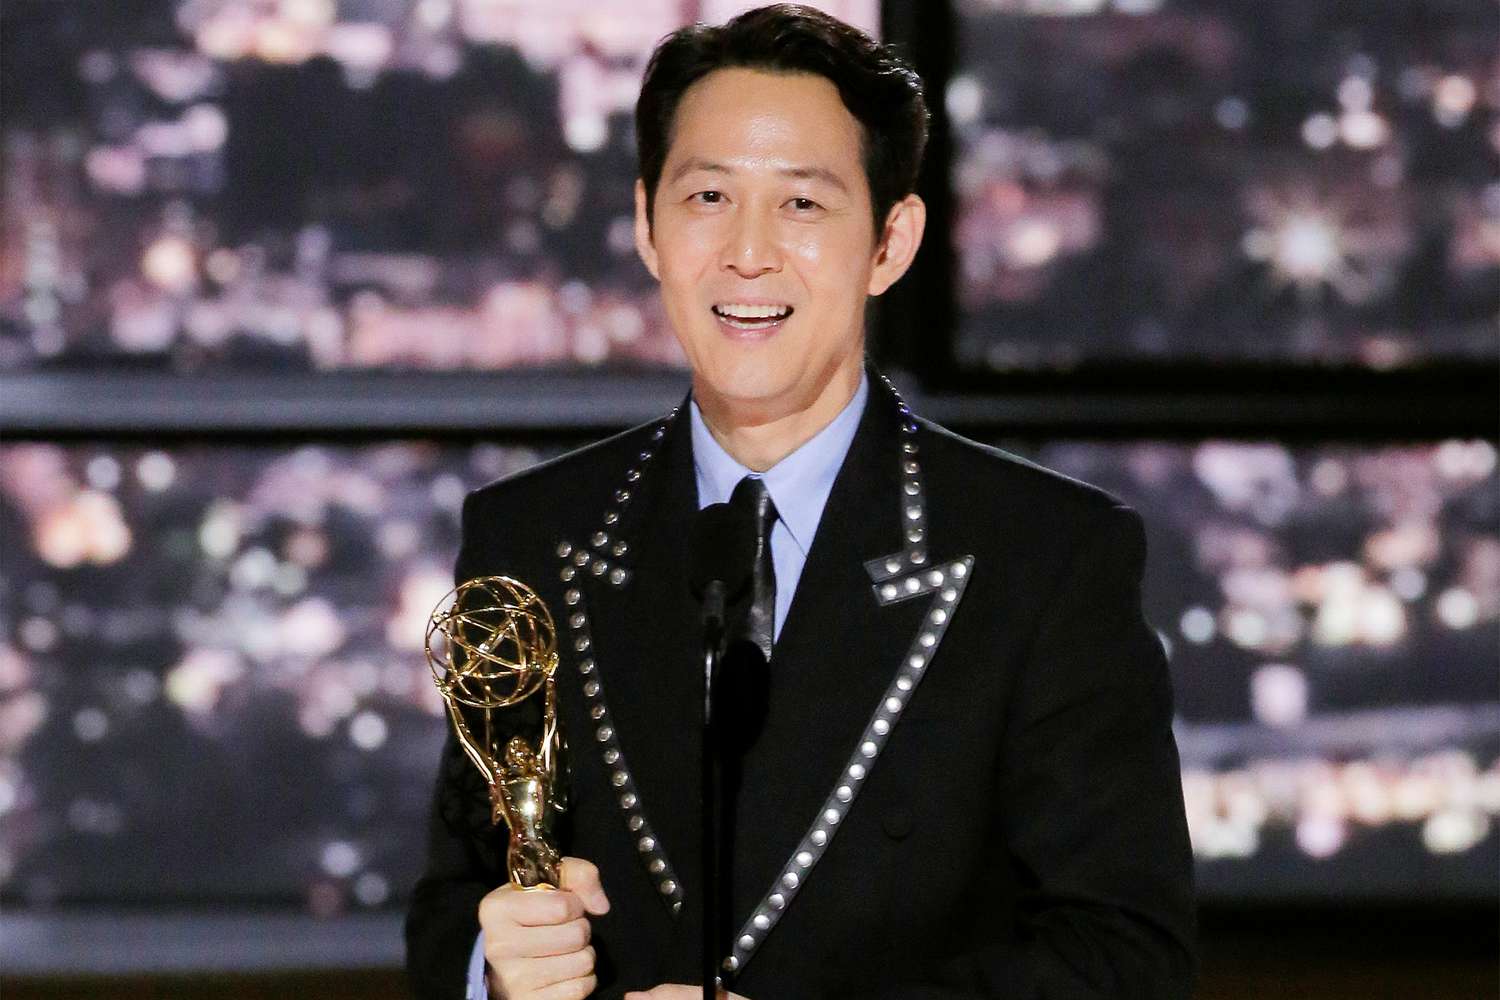 'Squid Game' star Lee Jung-jae wins the Emmy for Outstanding Lead Actor in a Drama Series